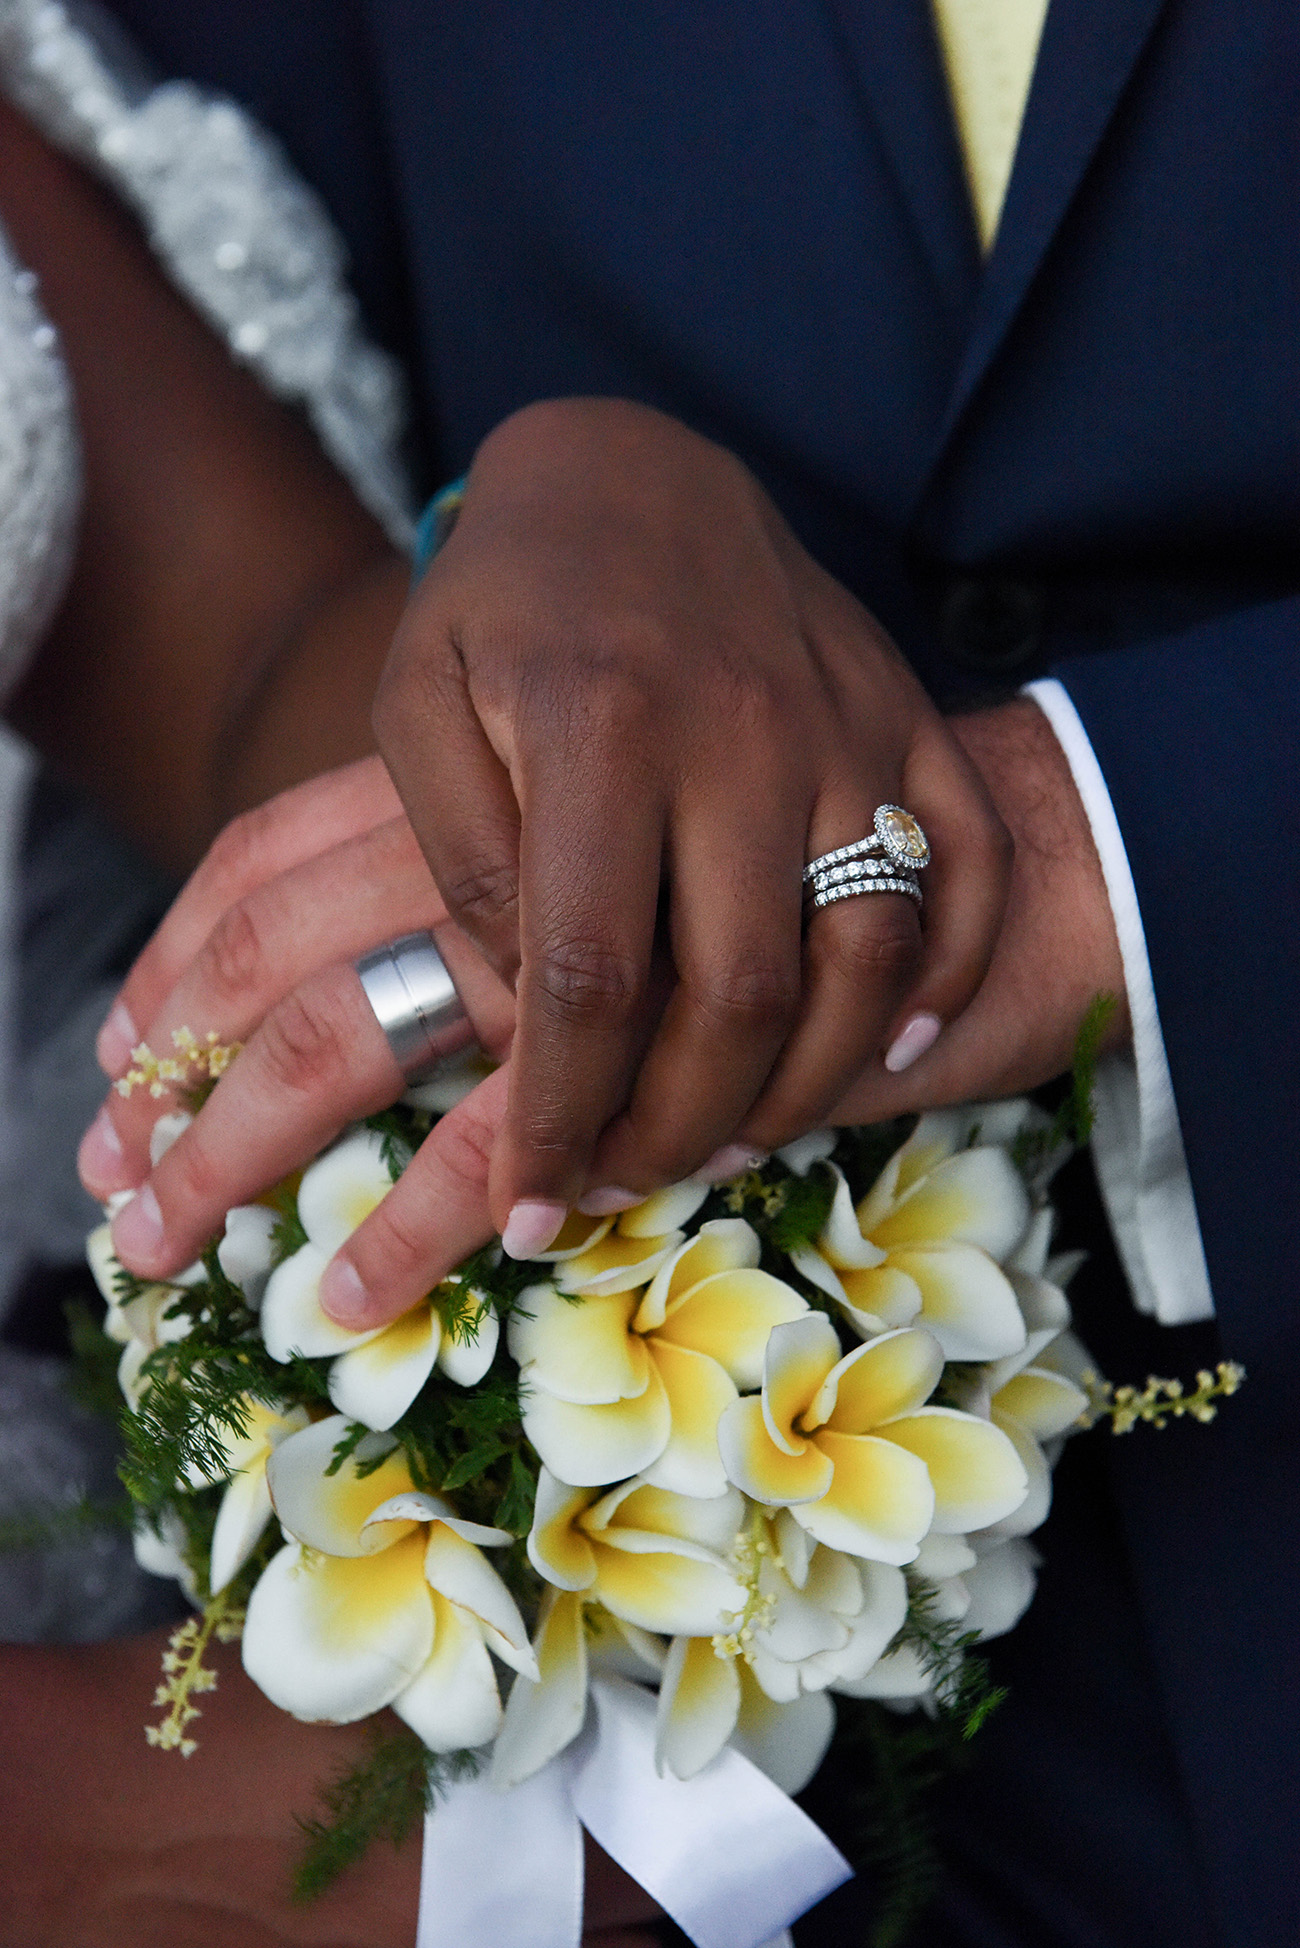 The bride and groom's hand with their wedding rings over the bride's bouquet made of frangipani flowers